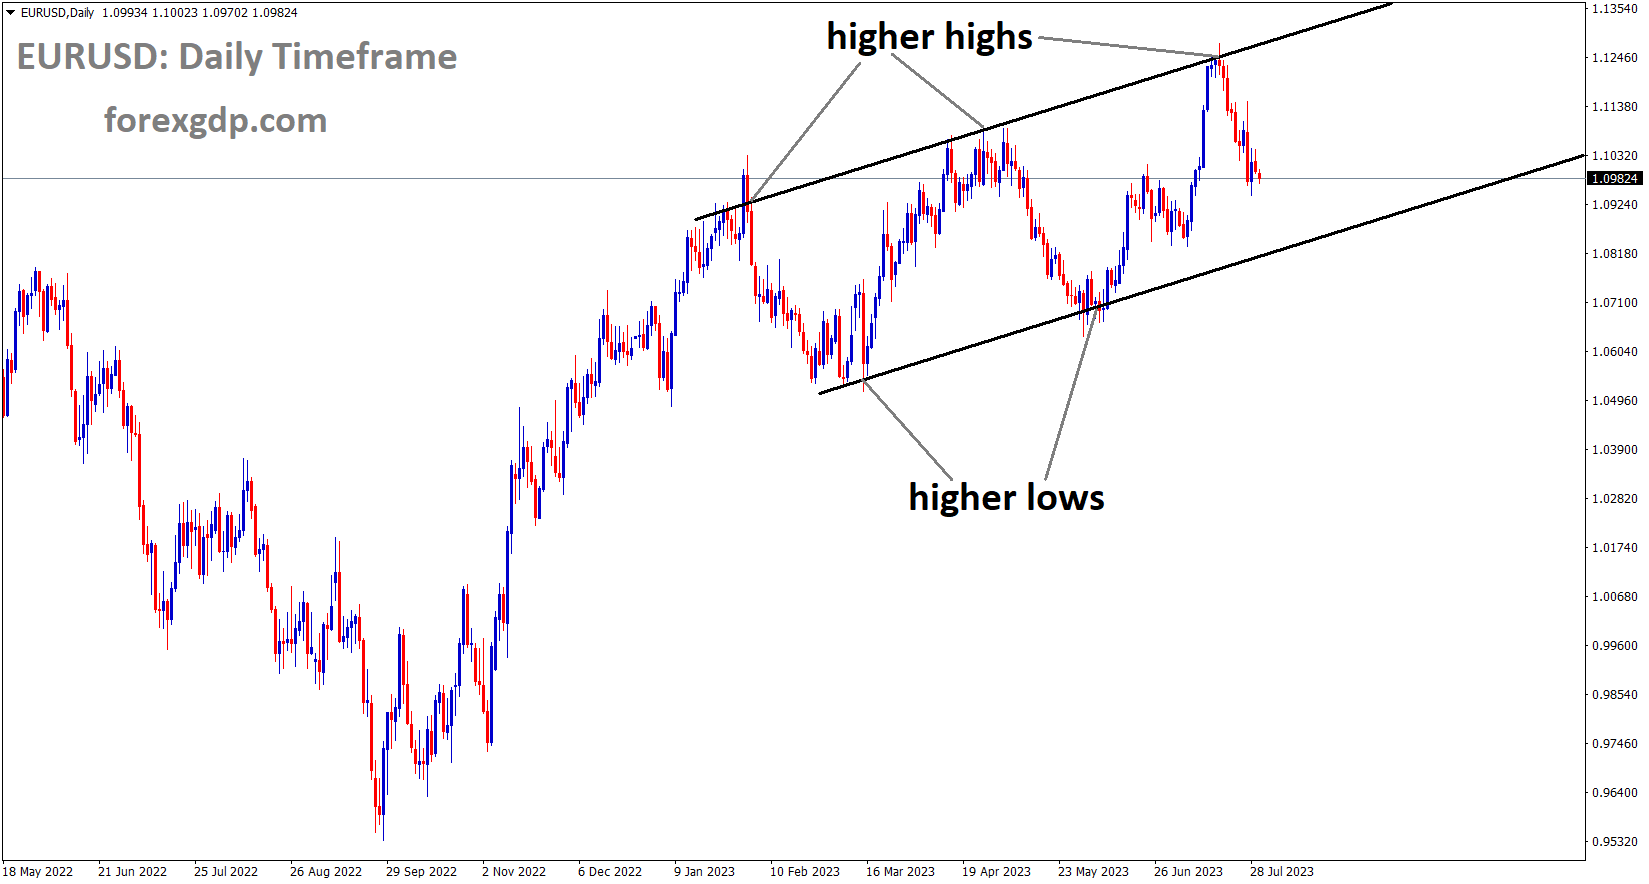 EURUSD is moving in an Ascending channel and the market has fallen from the higher high area of the channel